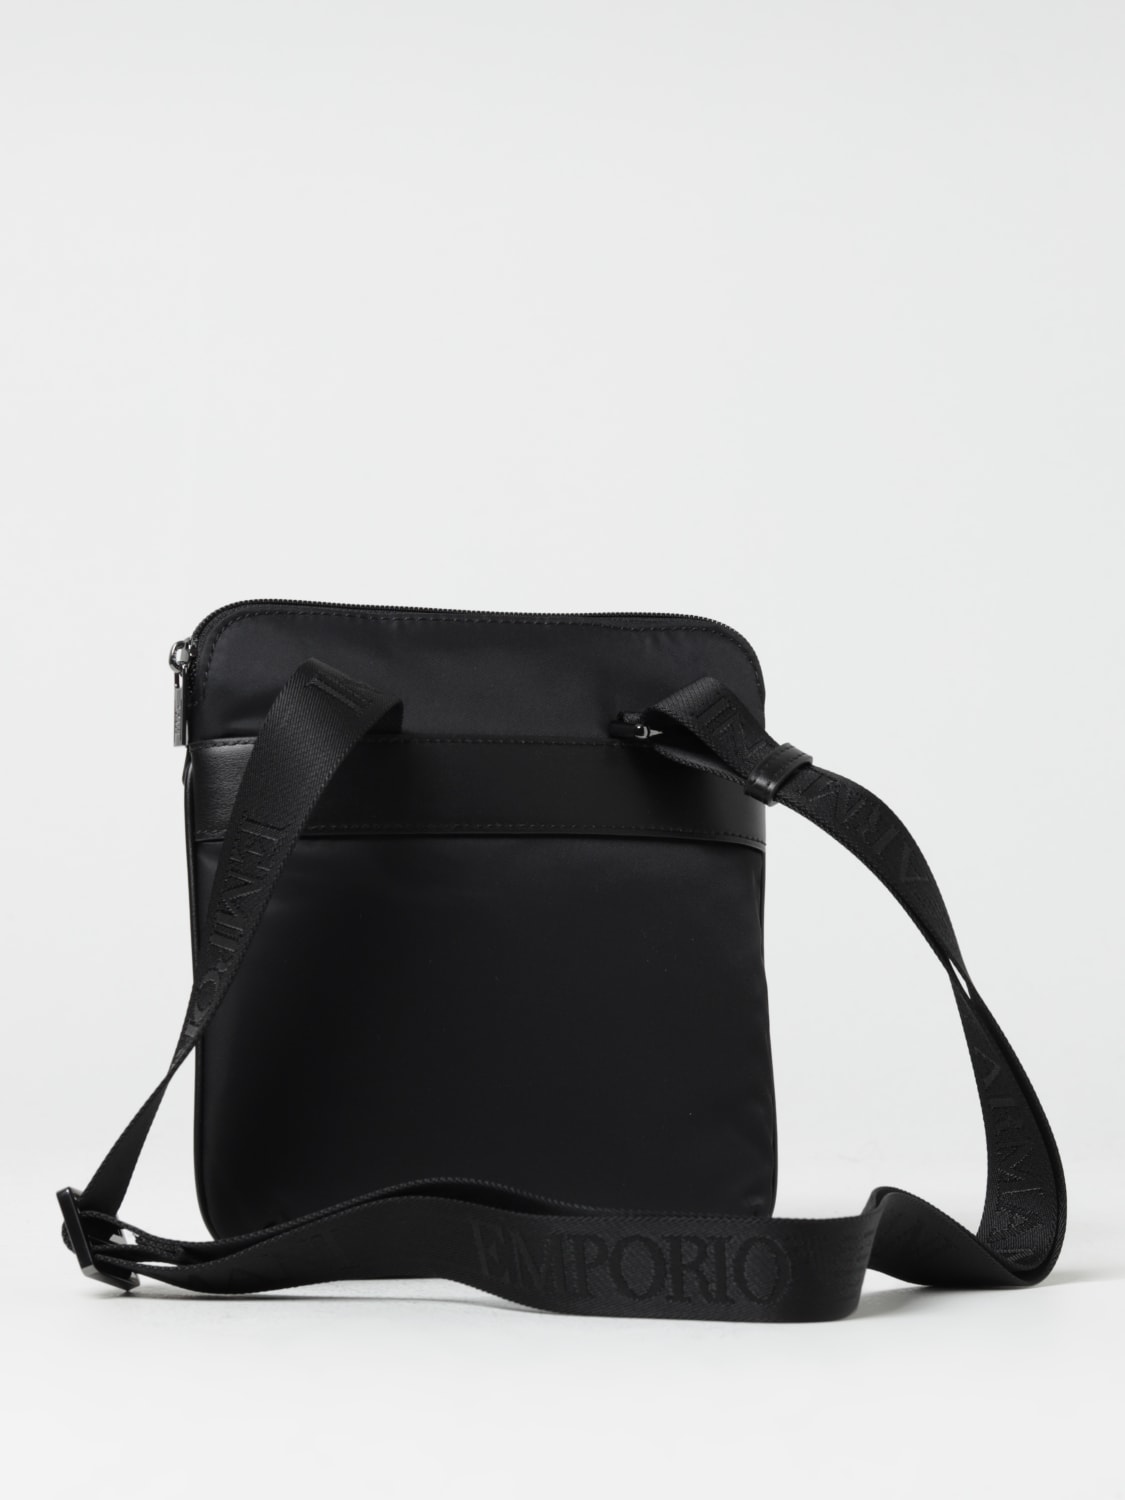 EMPORIO ARMANI: flat shoulder bag in recycled nylon - Black  Emporio  Armani shoulder bag Y4M185Y217J online at